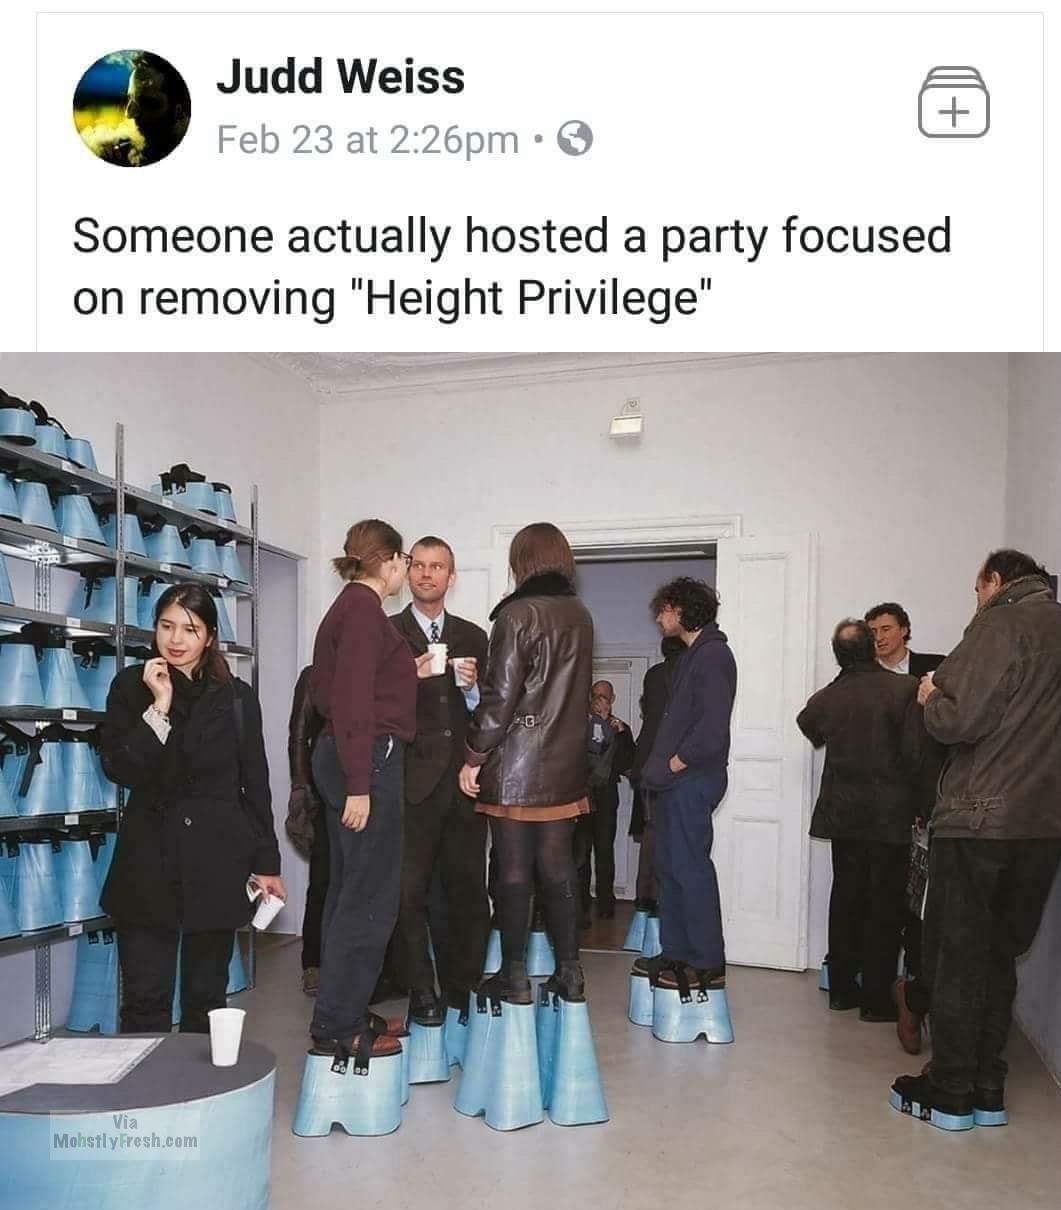 height privilege - Judd Weiss Feb 23 at pm Someone actually hosted a party focused on removing "Height Privilege" Via Mohstly Fresh.com